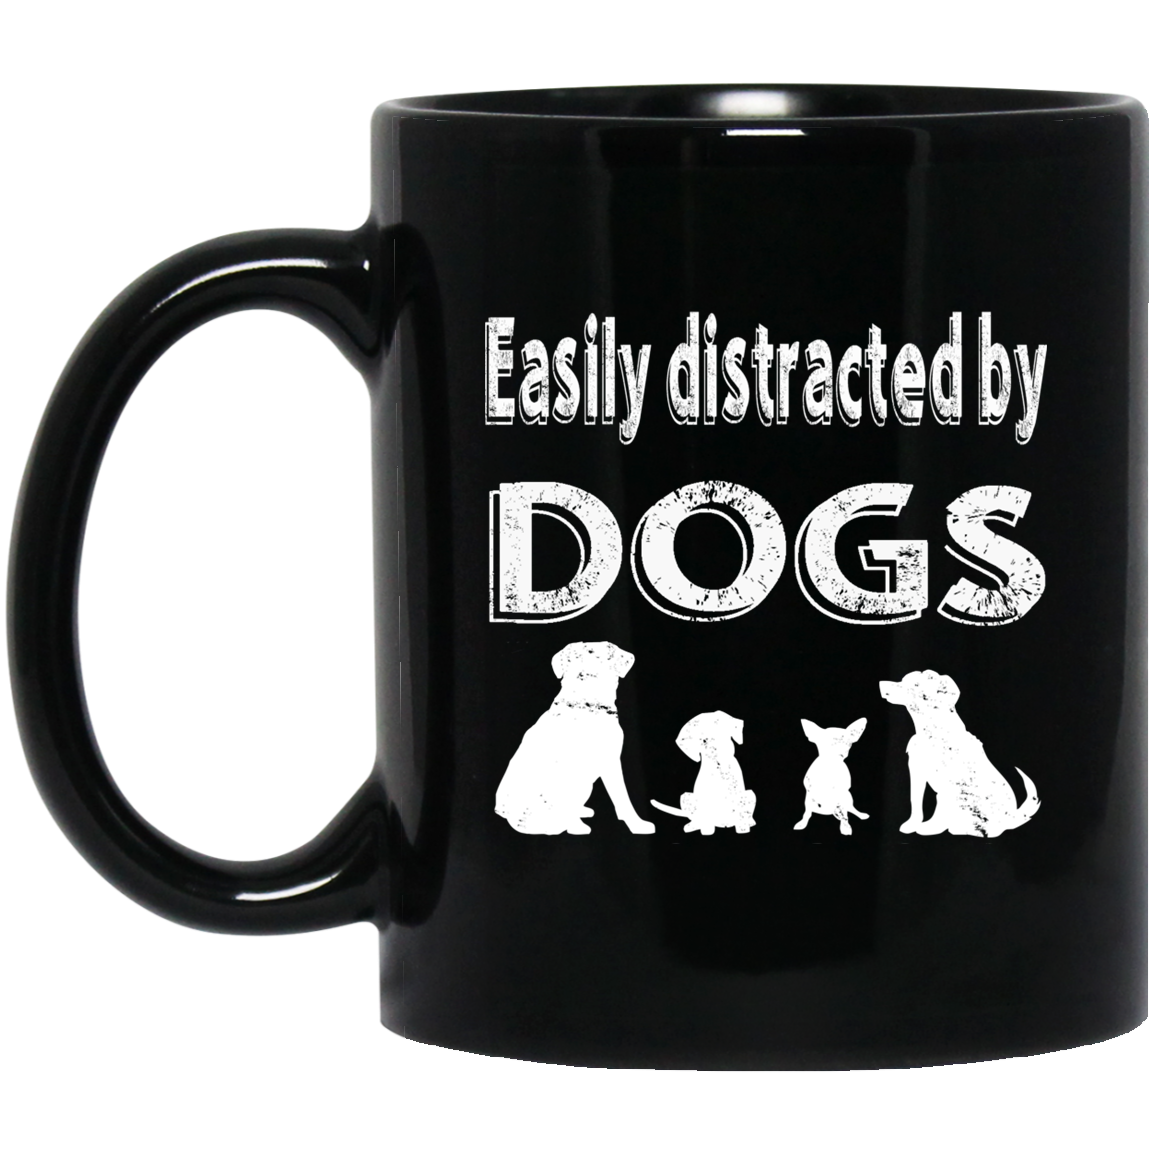 Distracted by Dogs - Black Mugs